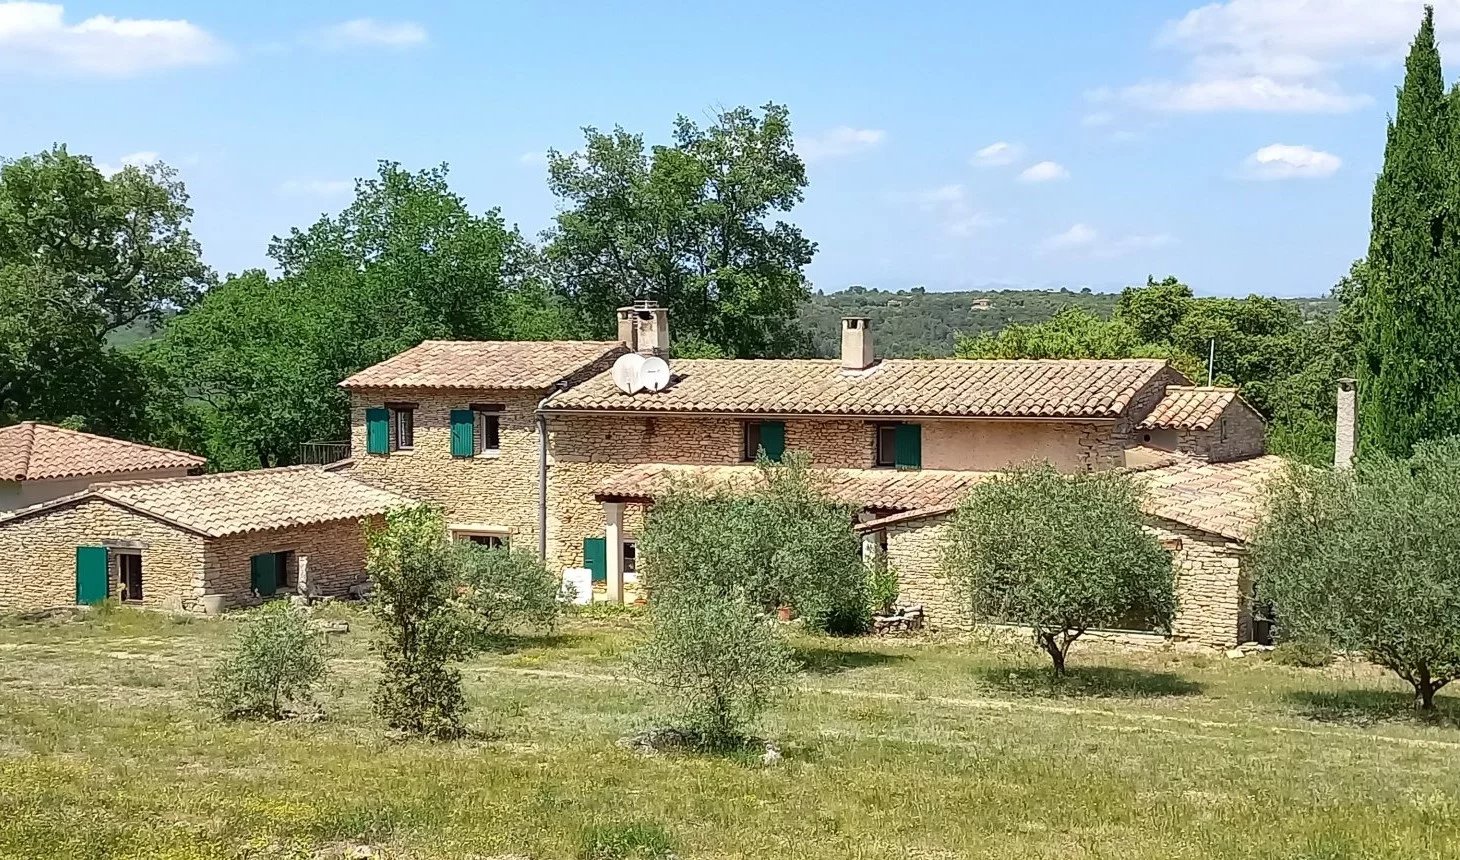 For lovers of nature - property with breathtaking views of the Luberon